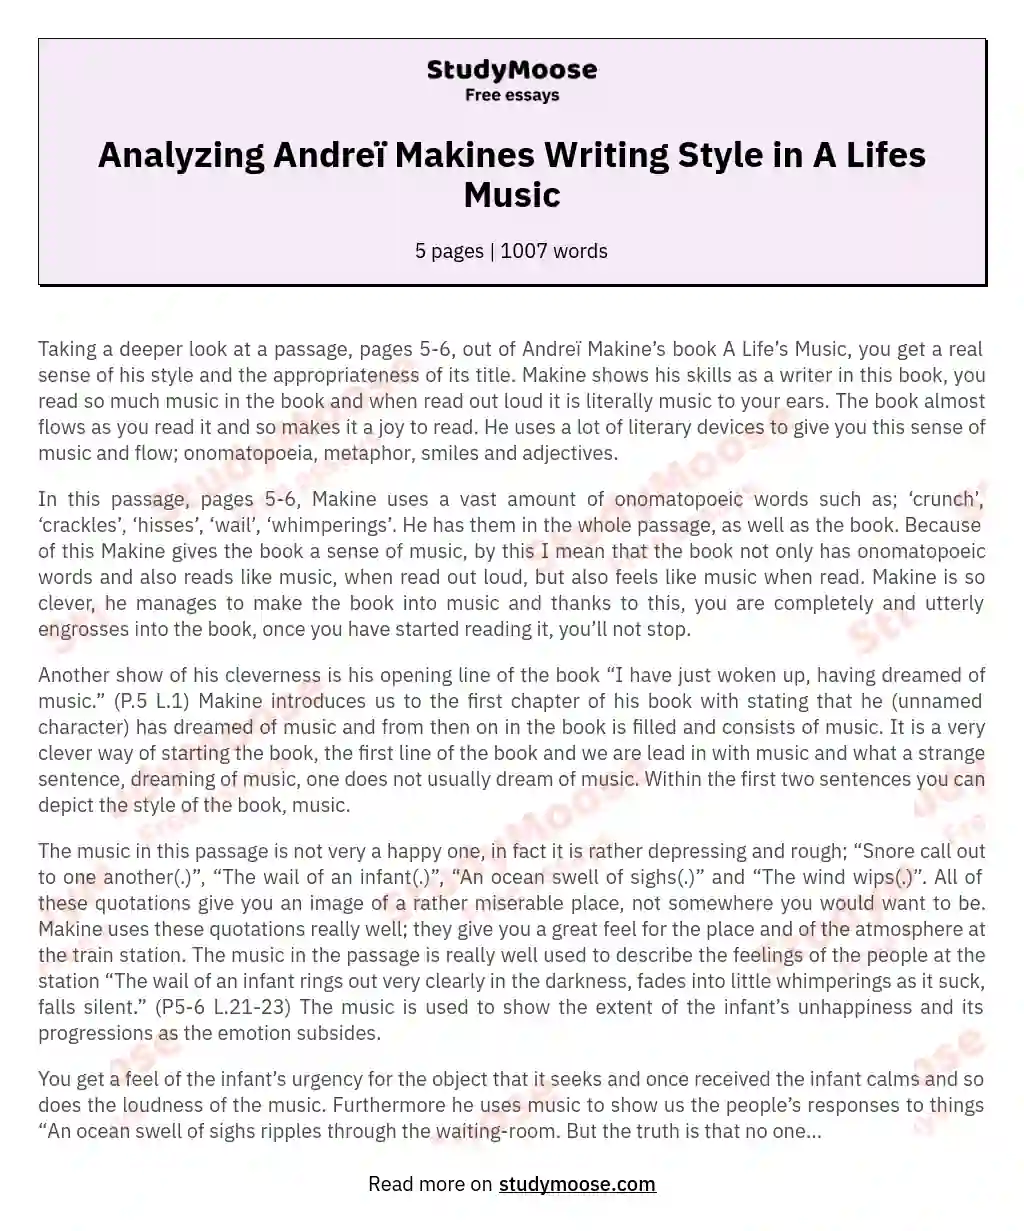 Analyzing Andreï Makines Writing Style in A Lifes Music essay